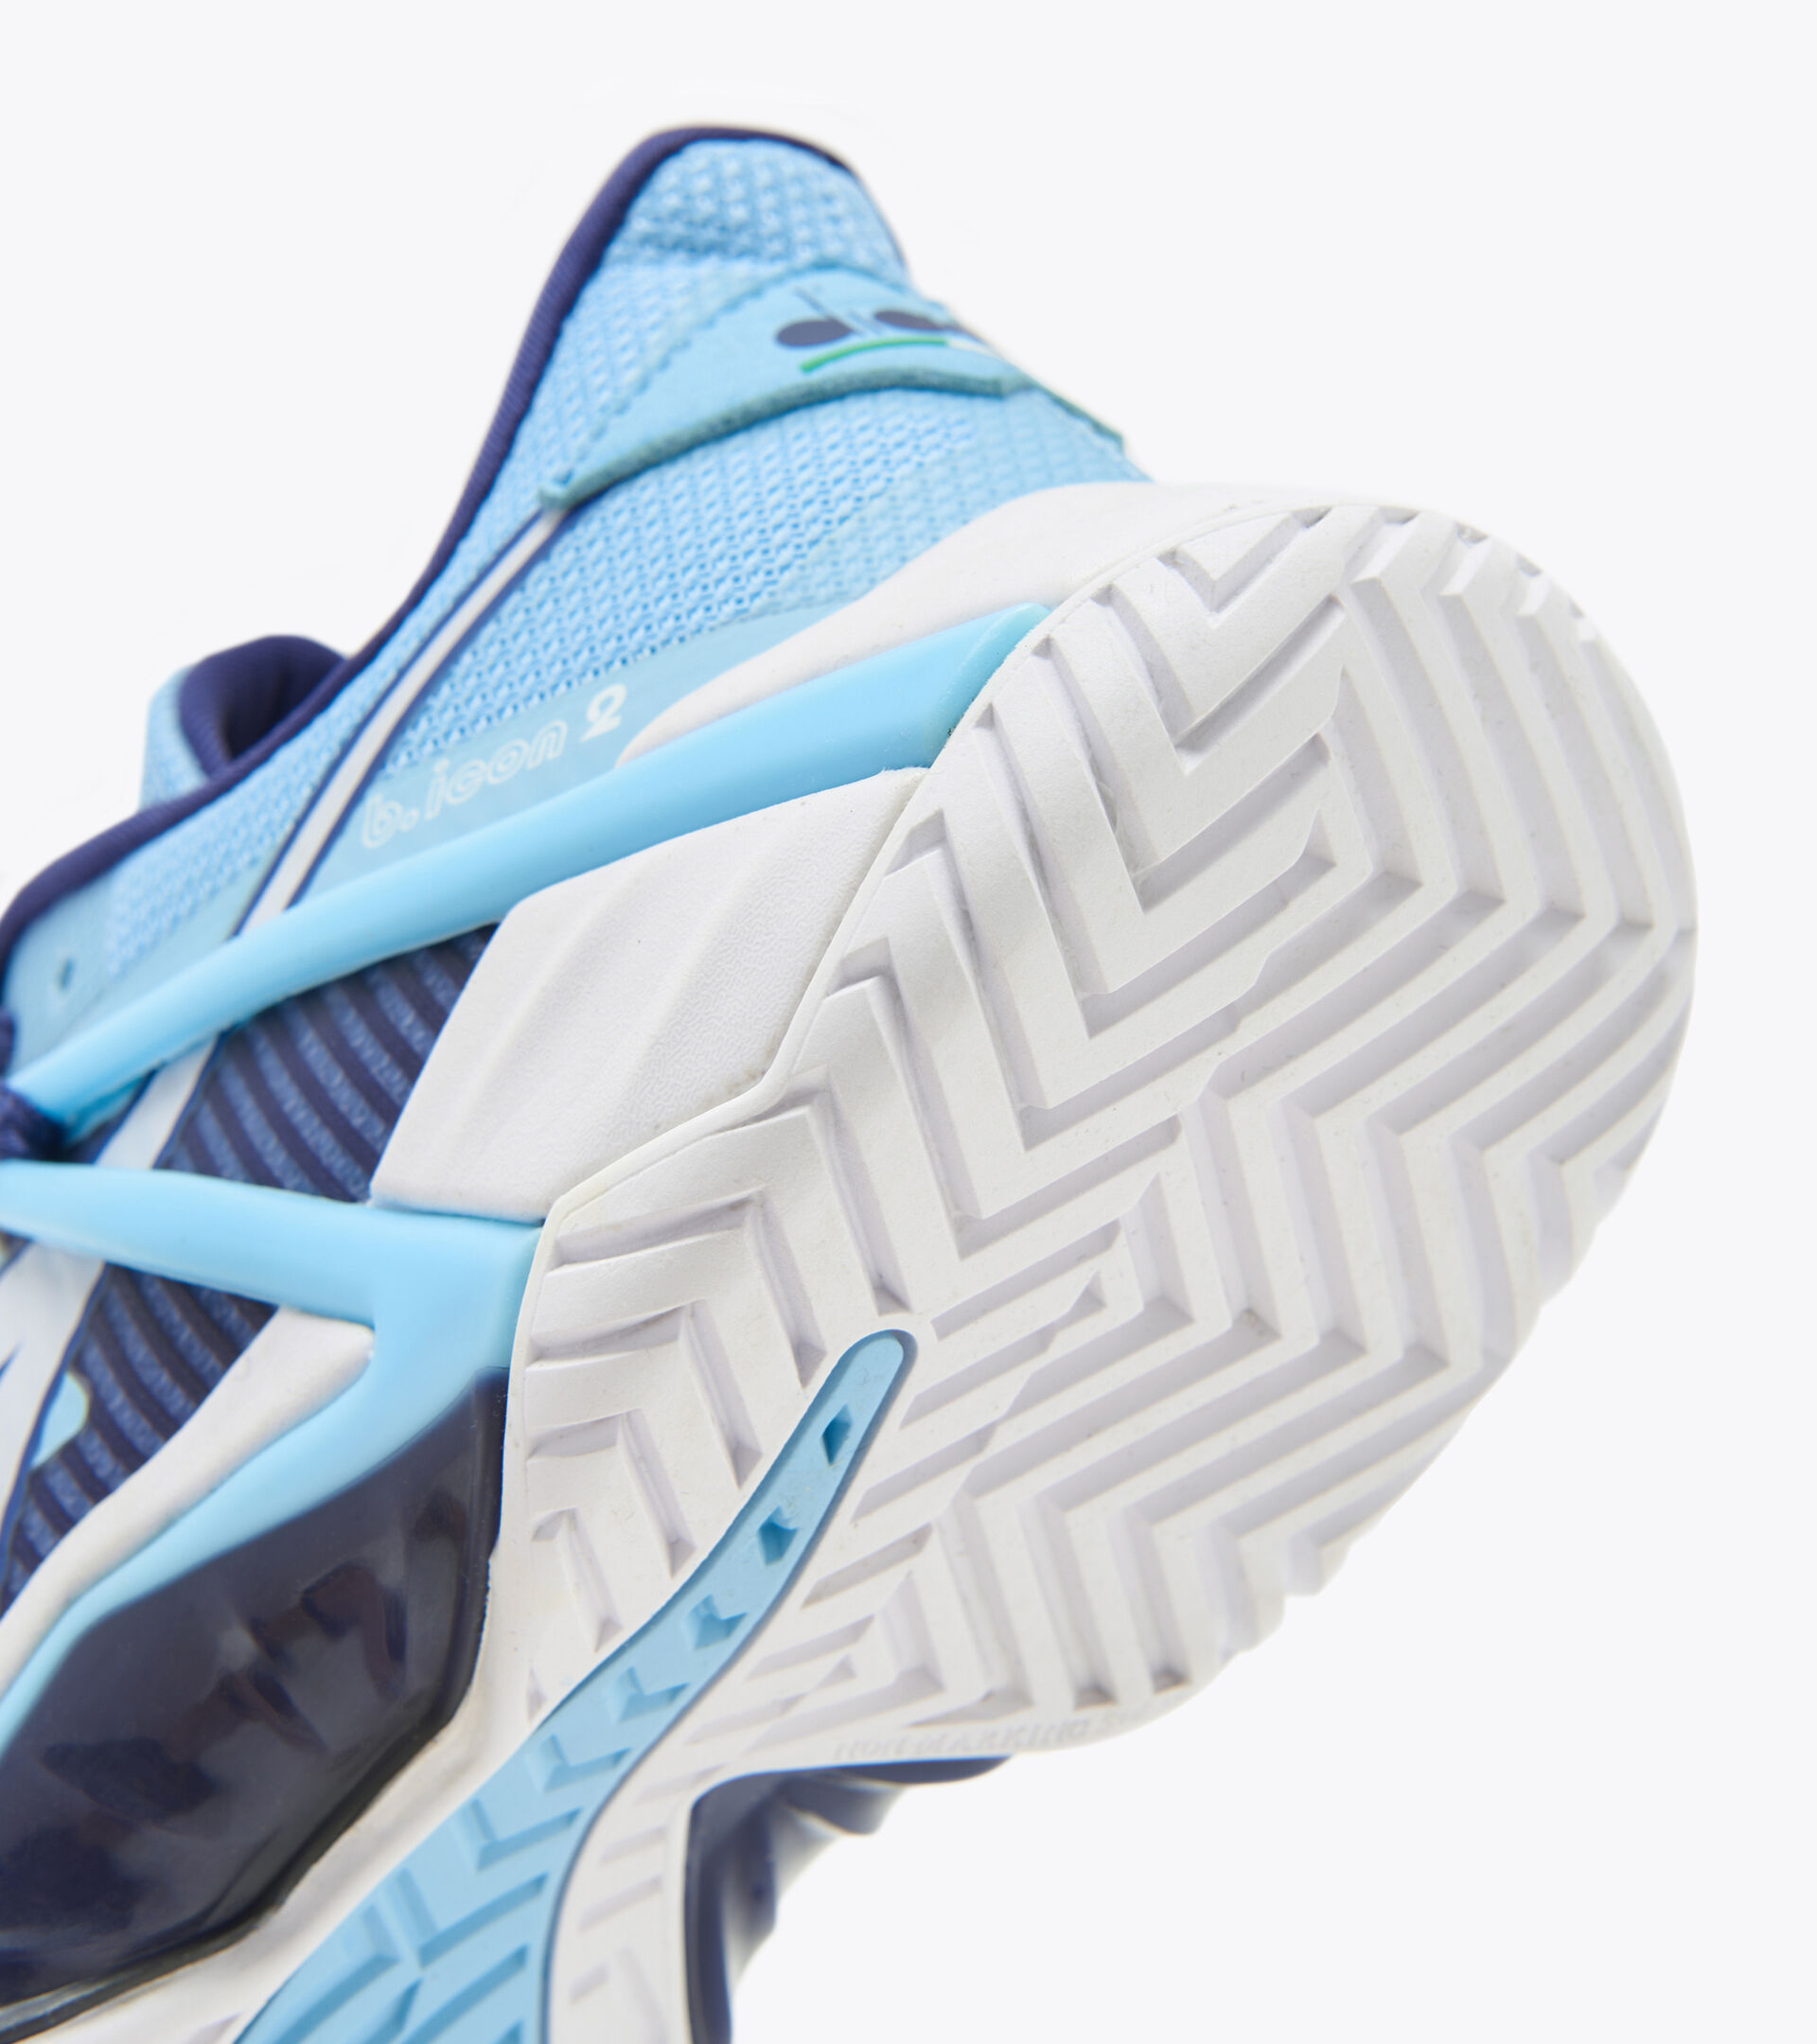 Tennis shoes for clay courts - Women B.ICON 2 W CLAY BRIGHT BABY BLUE/WHITE - Diadora